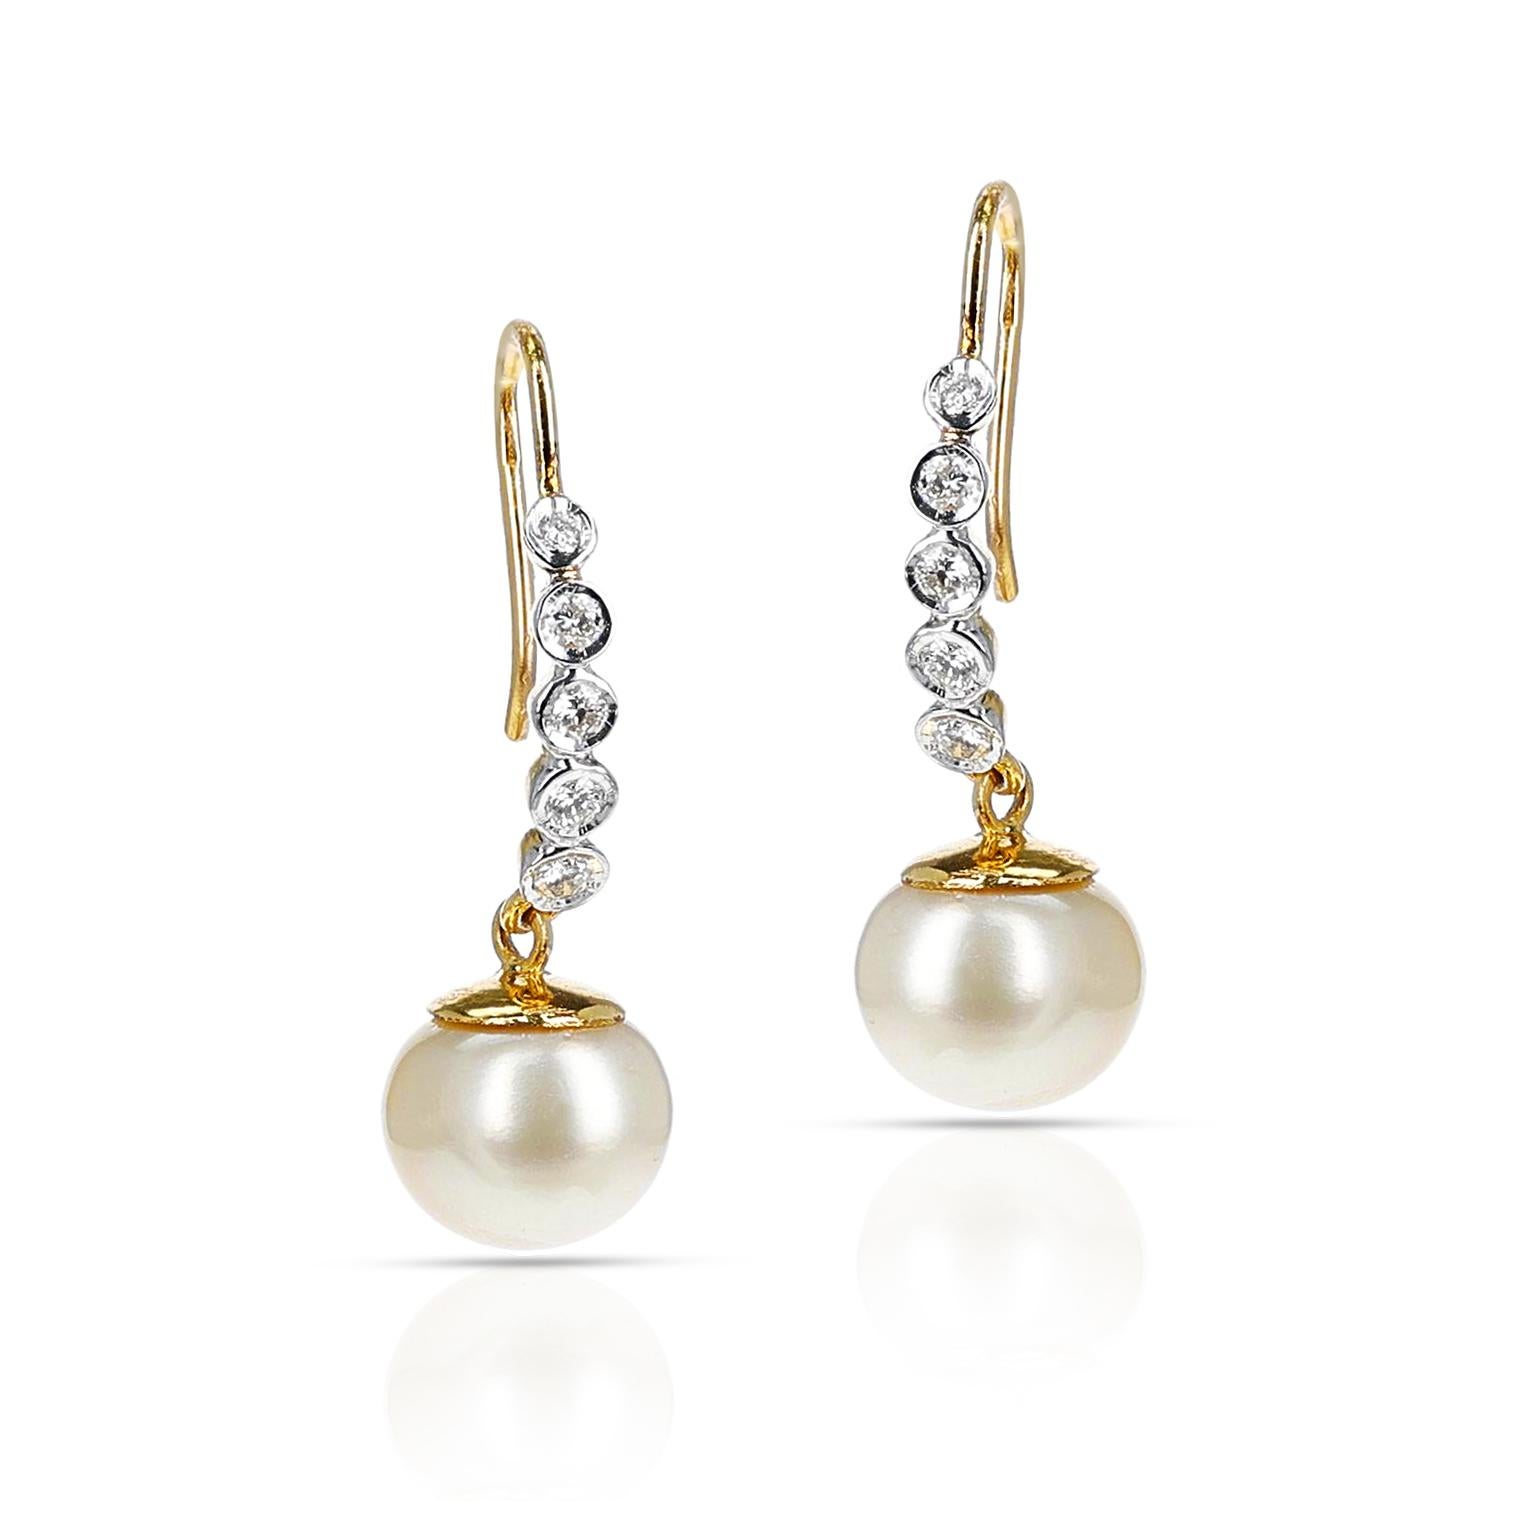 A pair of South Sea Pearl Dangling Earrings with Diamonds made in 14 Karat Yellow Gold. The weight of the pearls is 16.06 carats and the total weight of the diamonds is 0.43 carats. The total weight of the earrings is 6.62 grams. Matching pendant